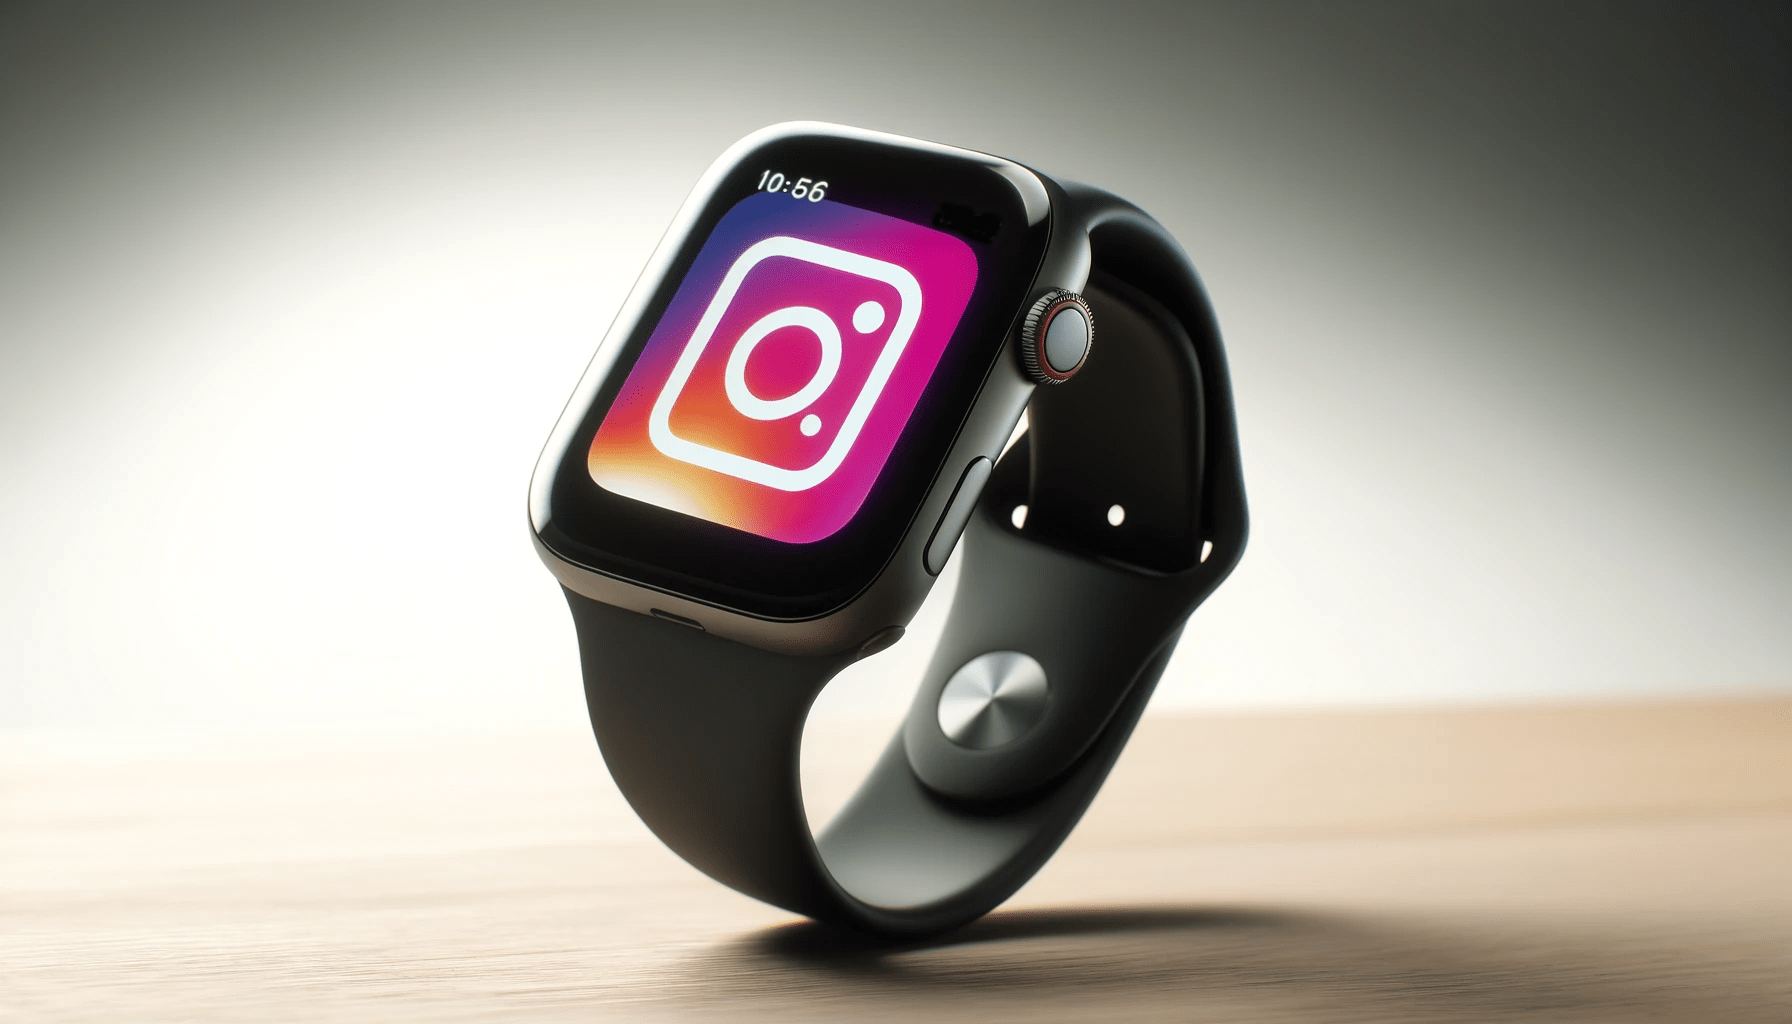 Download the Lens App to Access Instagram on Apple Watch